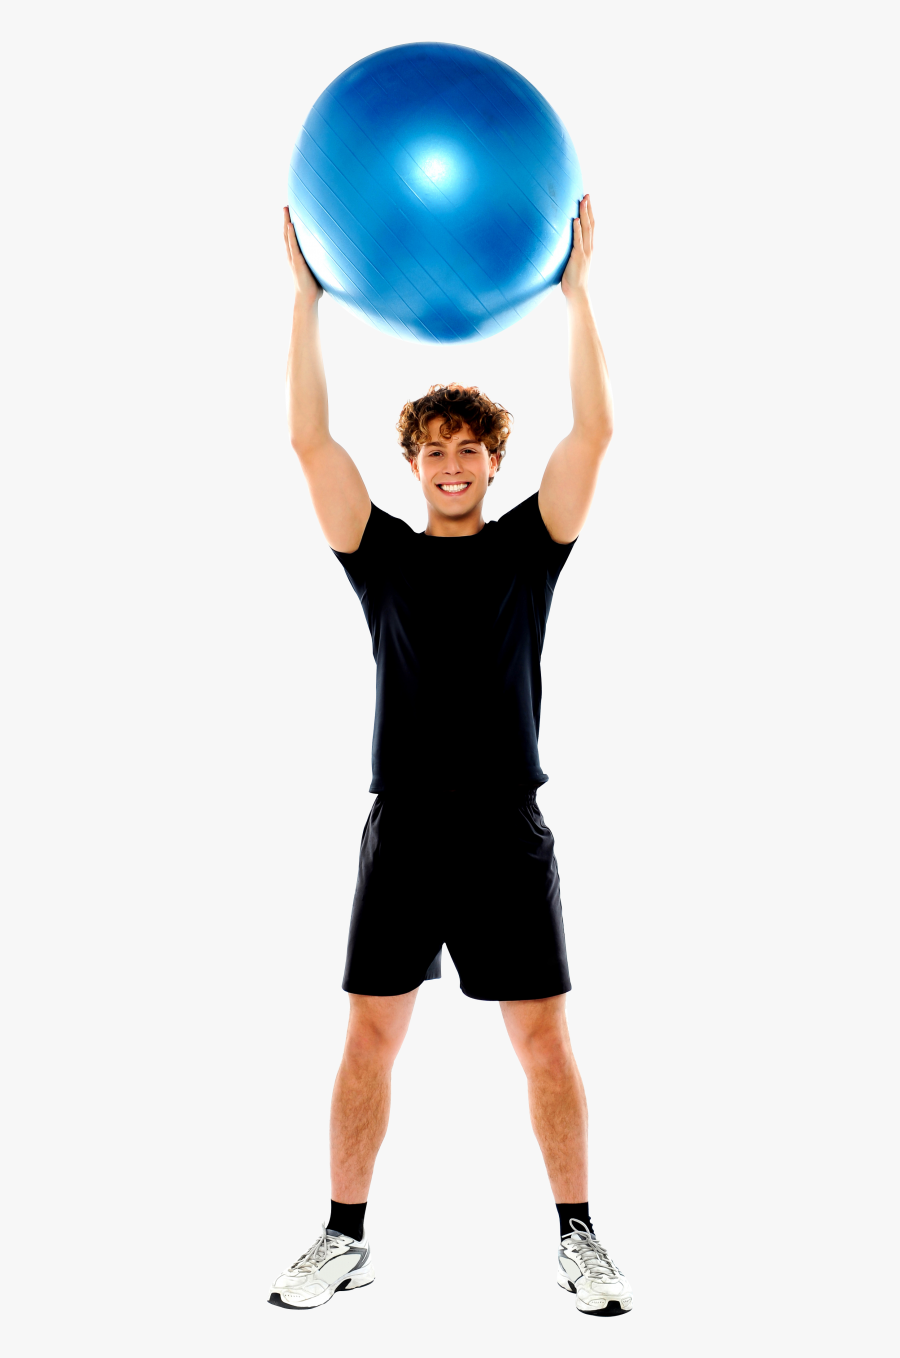 Man Fitness Png Image - Ball Over The Head, Transparent Clipart